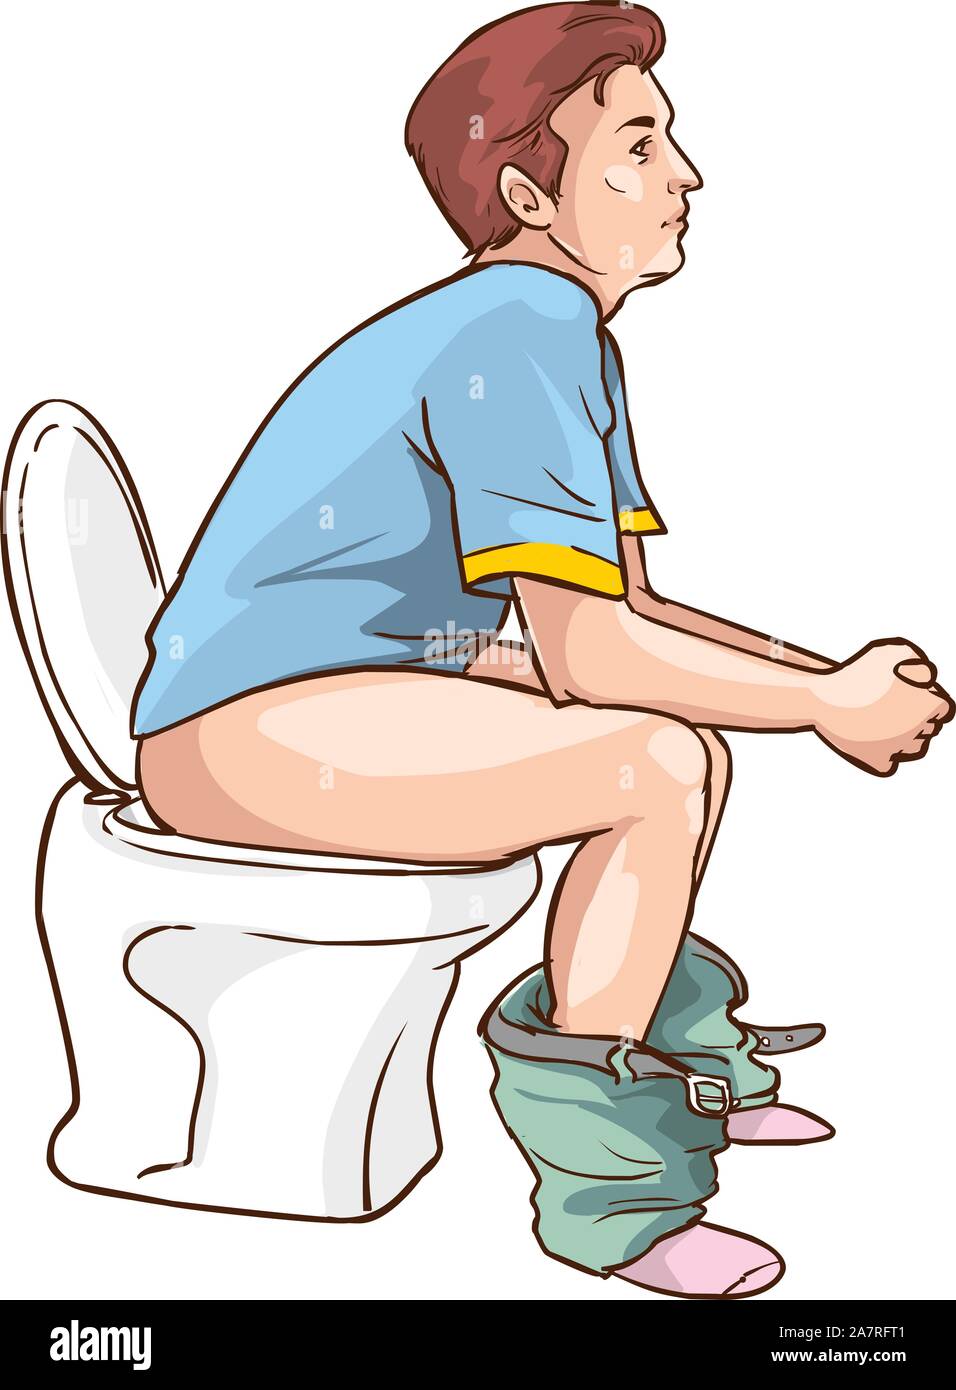 Man on toilet Cut Out Stock Images & Pictures - Alamy